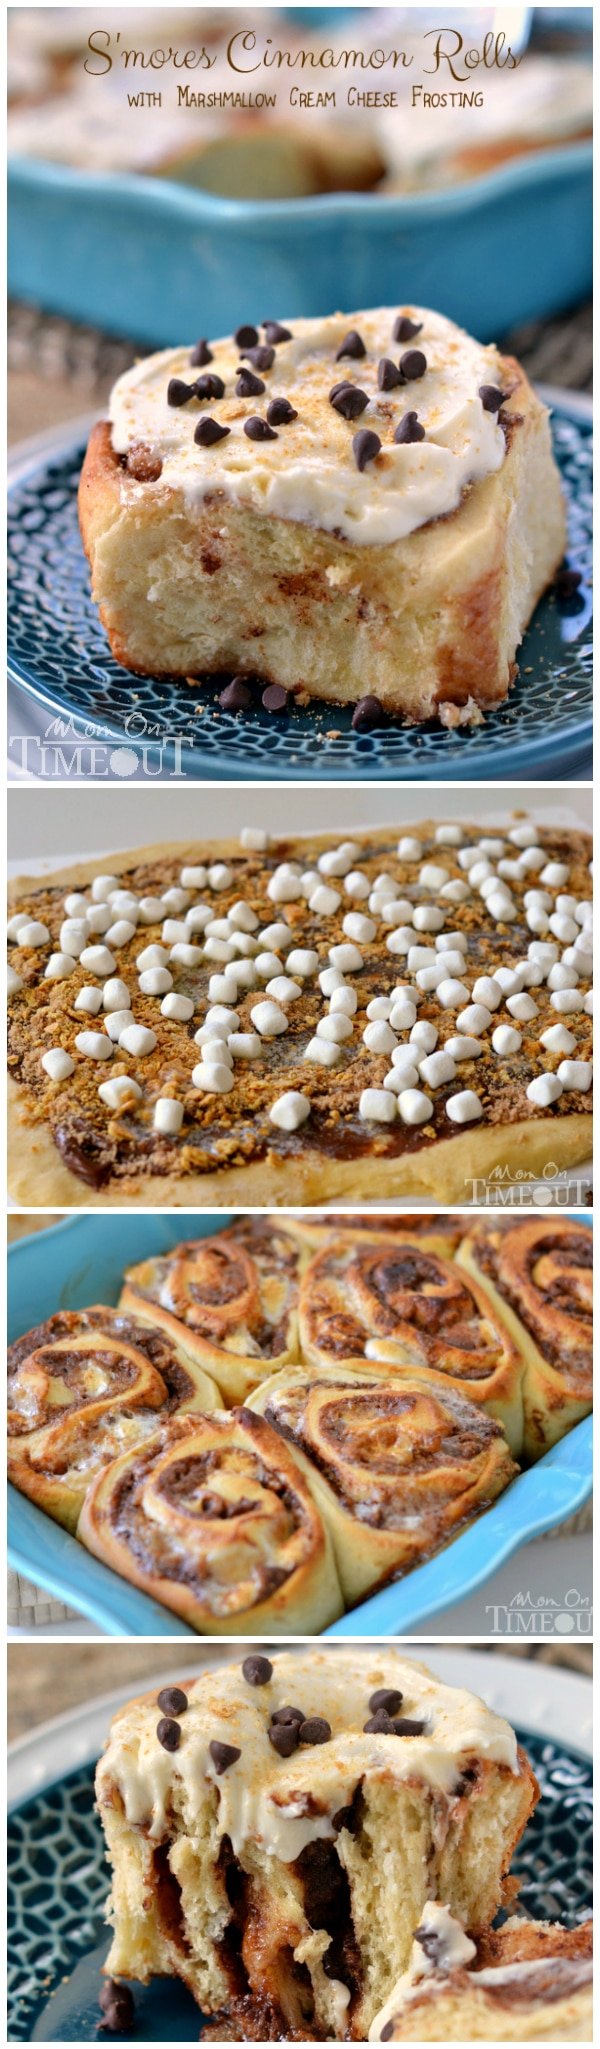 S'mores Cinnamon Rolls with Marshmallow Cream Cheese Frosting | MomOnTimeout.com #breakfast #recipe #smores